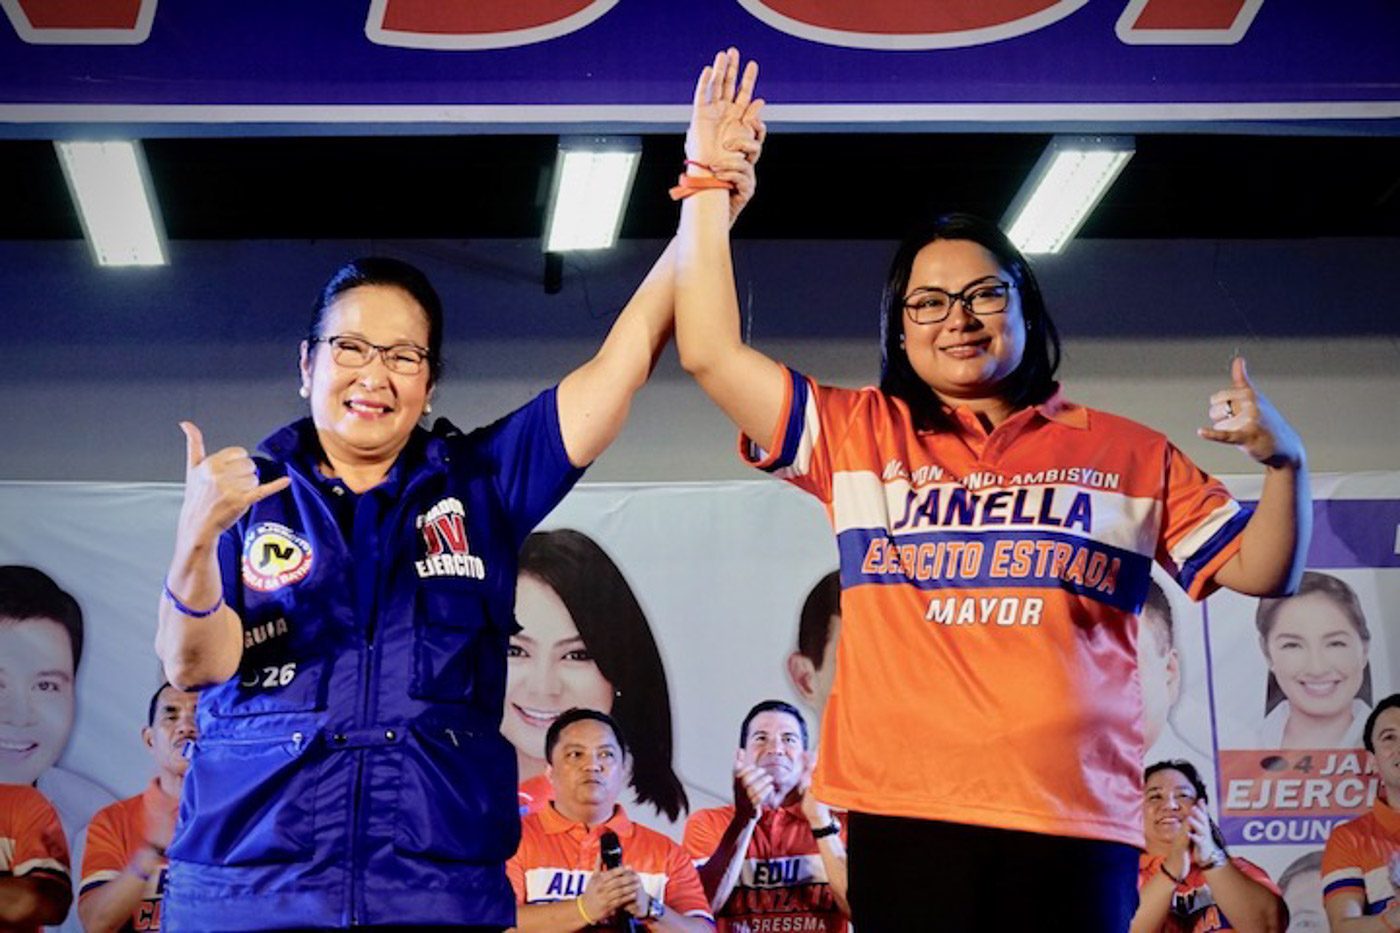 PASSING THE POSITION. Guia Gomez, 3-term mayor of San Juan City, endorses her step-granddaughter Janella Ejercito Estrada to be her successor at the Team One San Juan proclamation rally at the Plaza ng Masa on March 30. Photo by Rambo Talabong/Rappler 